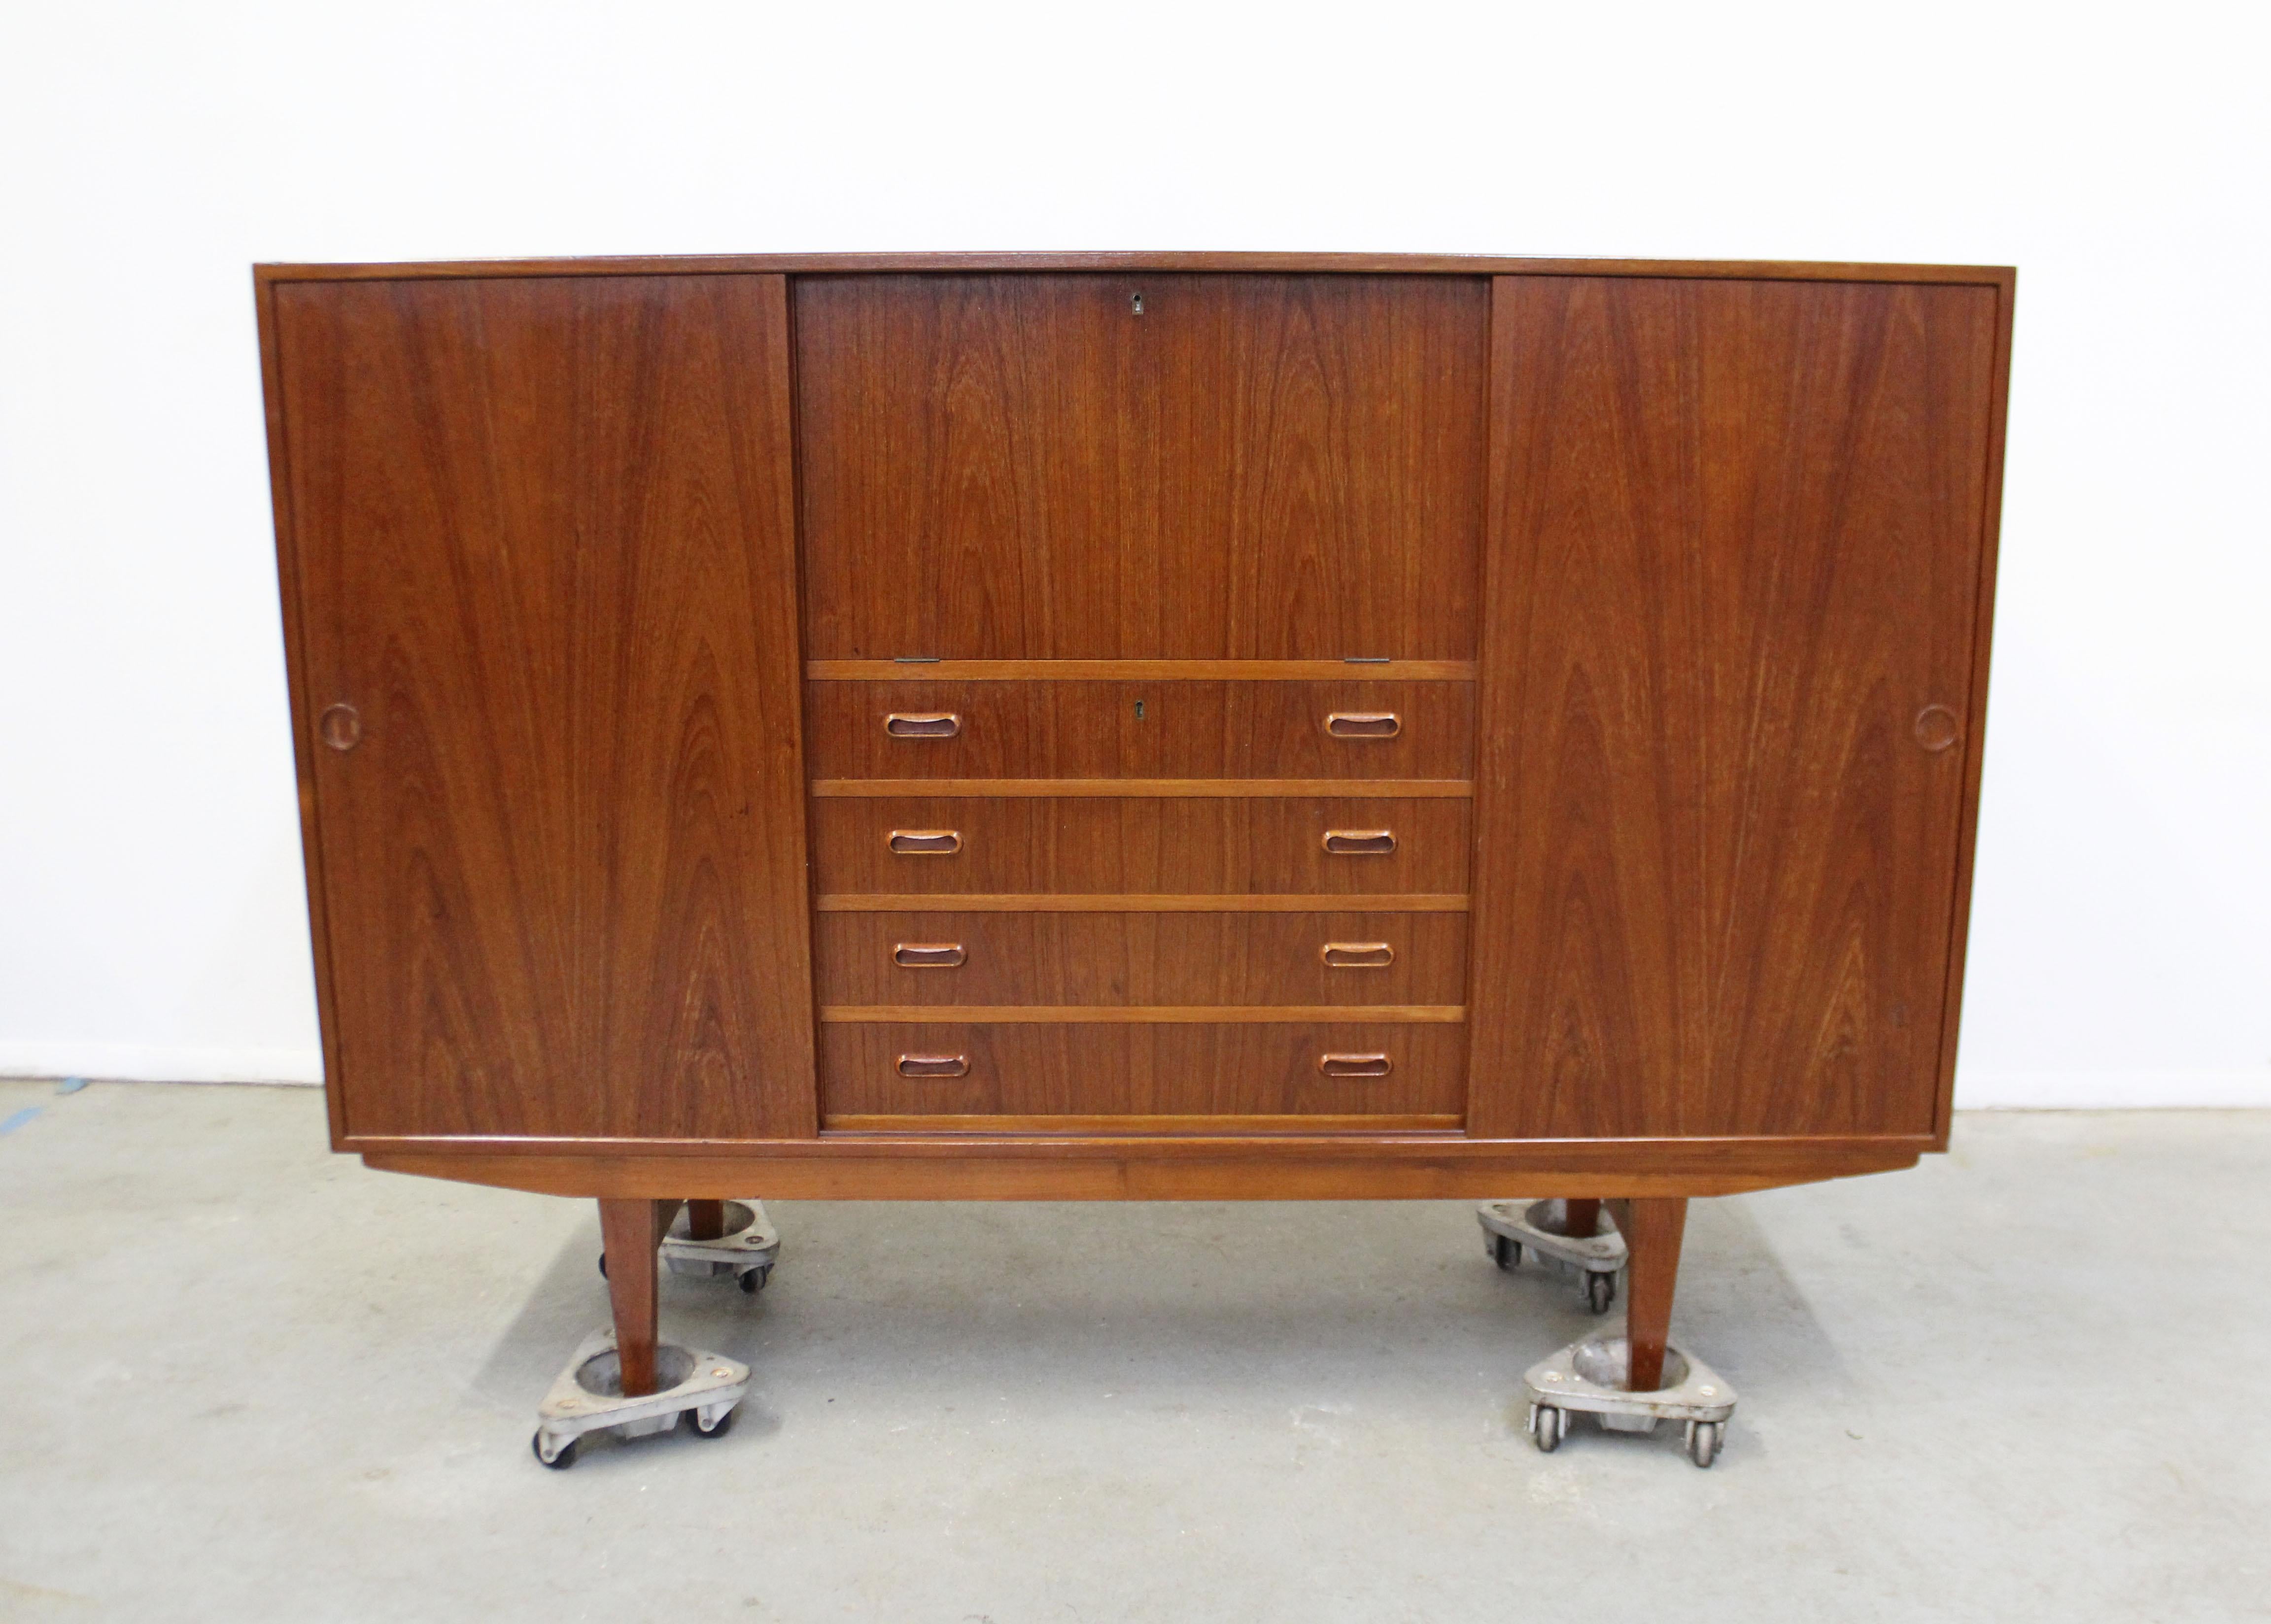 Offered is a teak credenza/highboard by Omann Jun. Features sliding doors with shelving, 4 drawers, and a pull-down surface. Comes with a key to lock drawers and secretary. It is in great condition, showing some age wear, (surface scratches/chips,